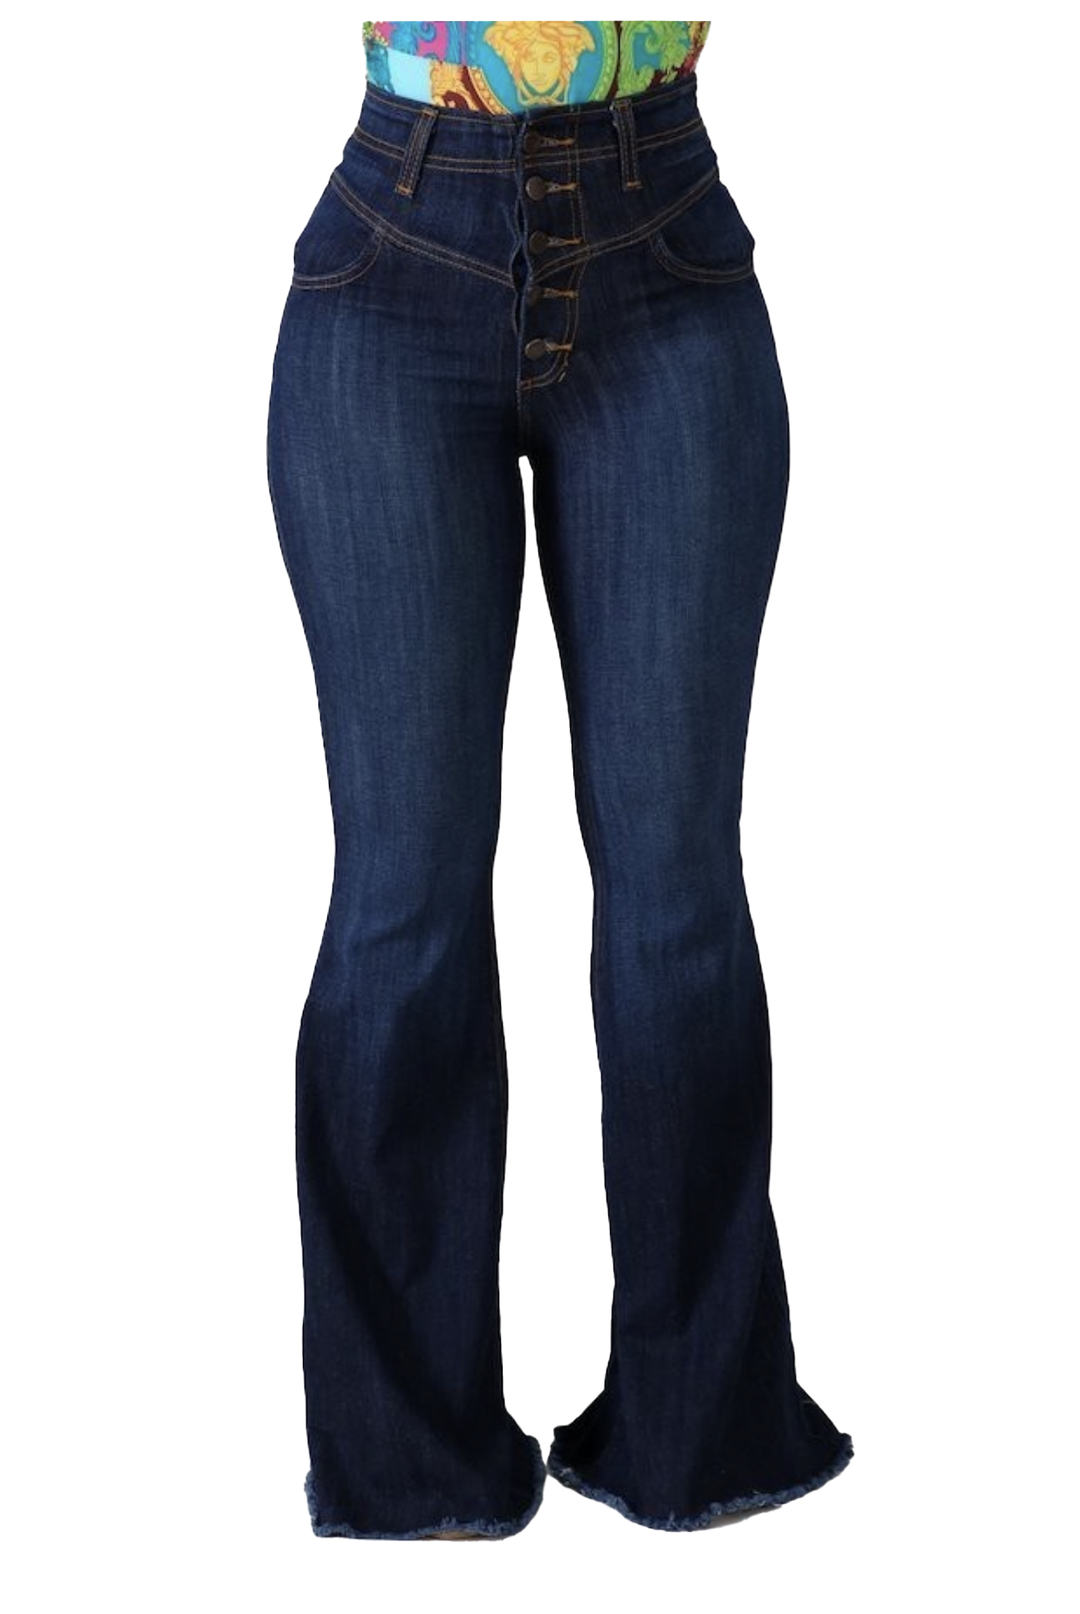 PSF18- High Rise Bell Bottom Jeans